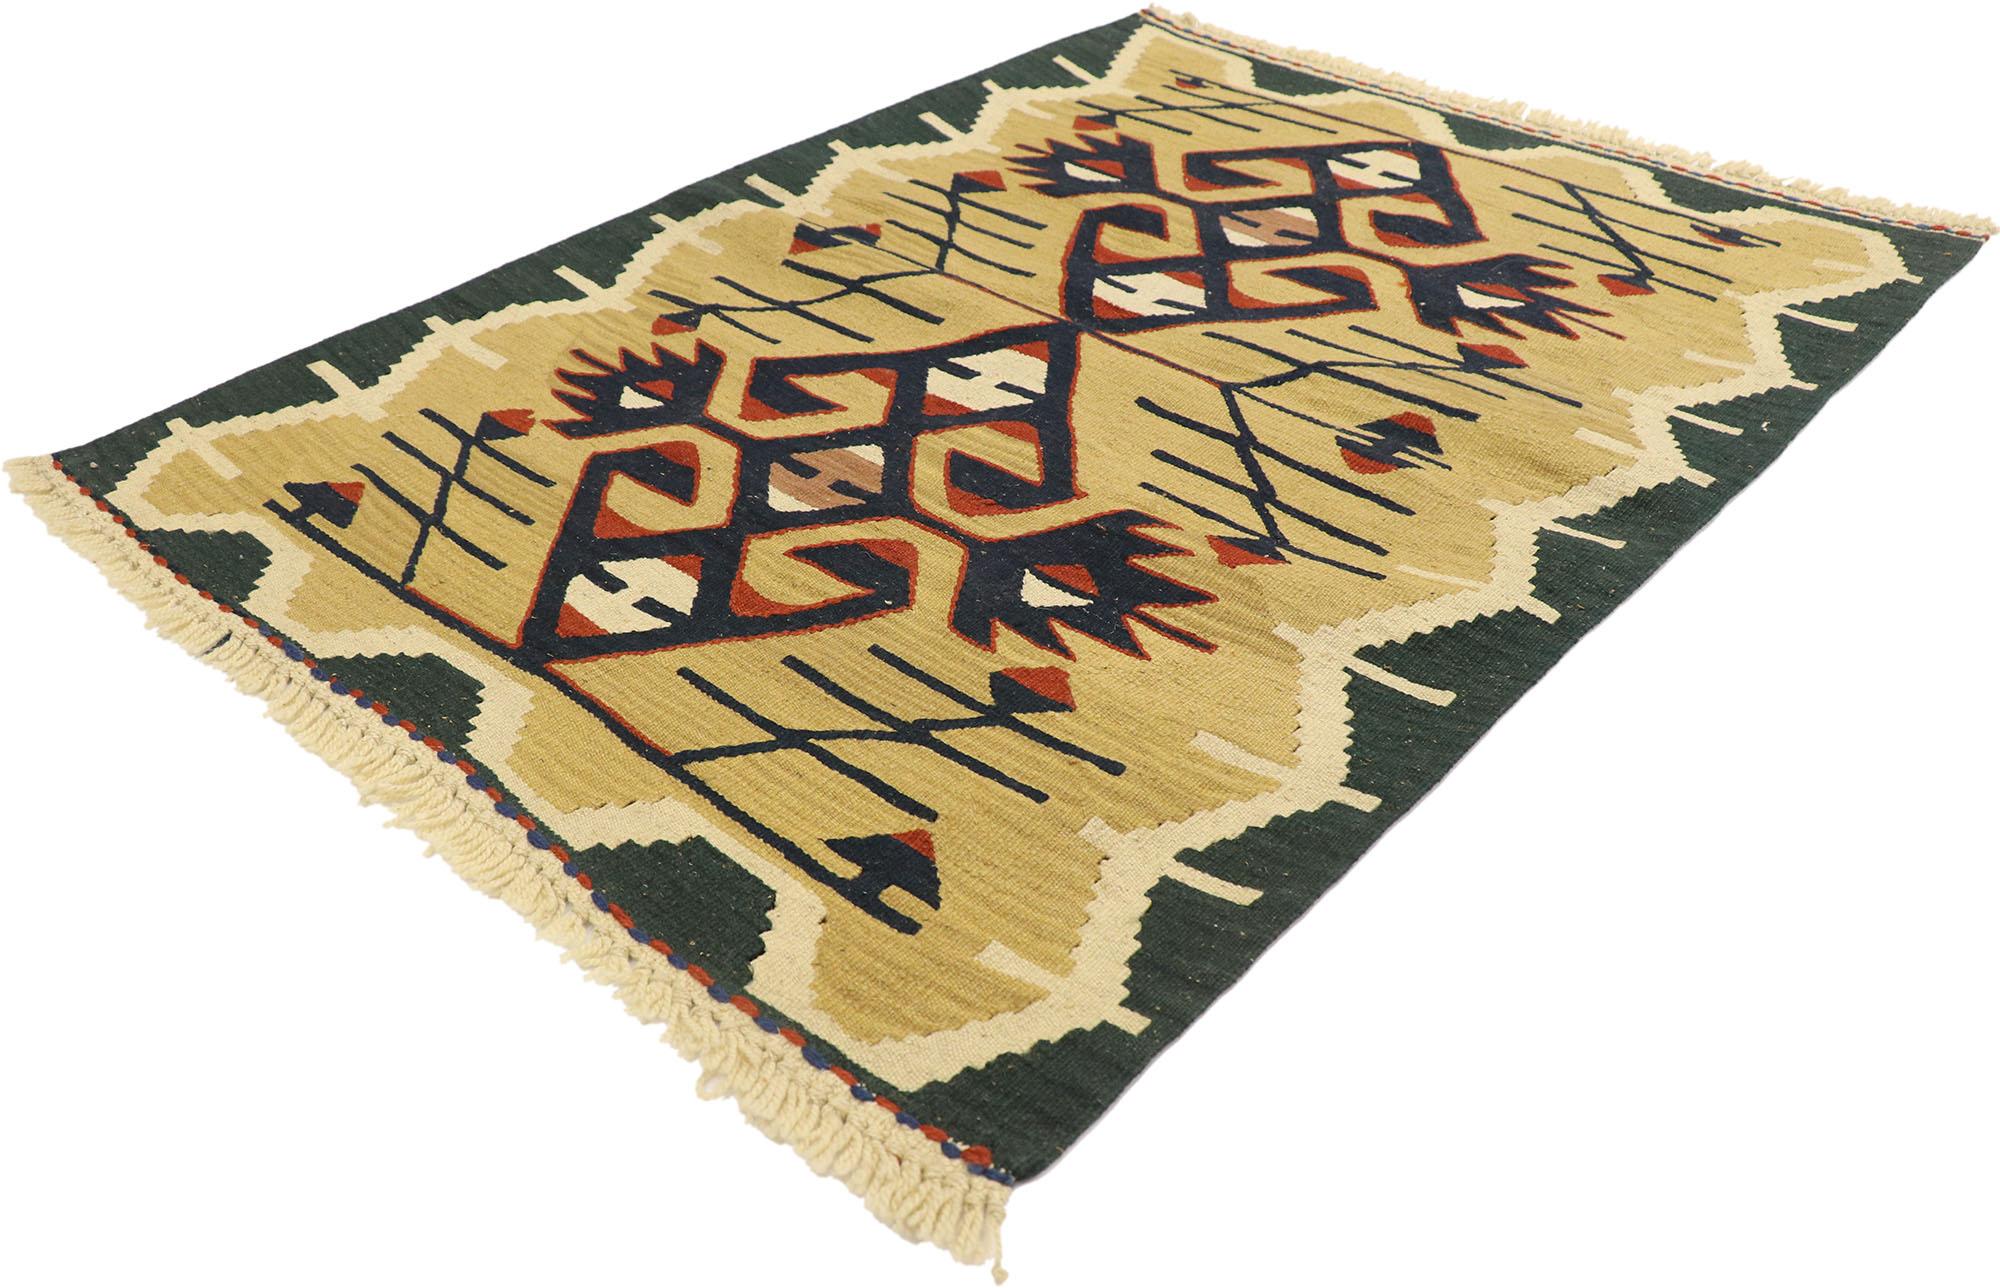 77978 Vintage Persian Shiraz Kilim rug with Tribal Style 02'10 x 03'09. Full of tiny details and a bold expressive design combined with an earthy colorway and tribal style, this hand-woven wool vintage Persian Shiraz kilim rug is a captivating